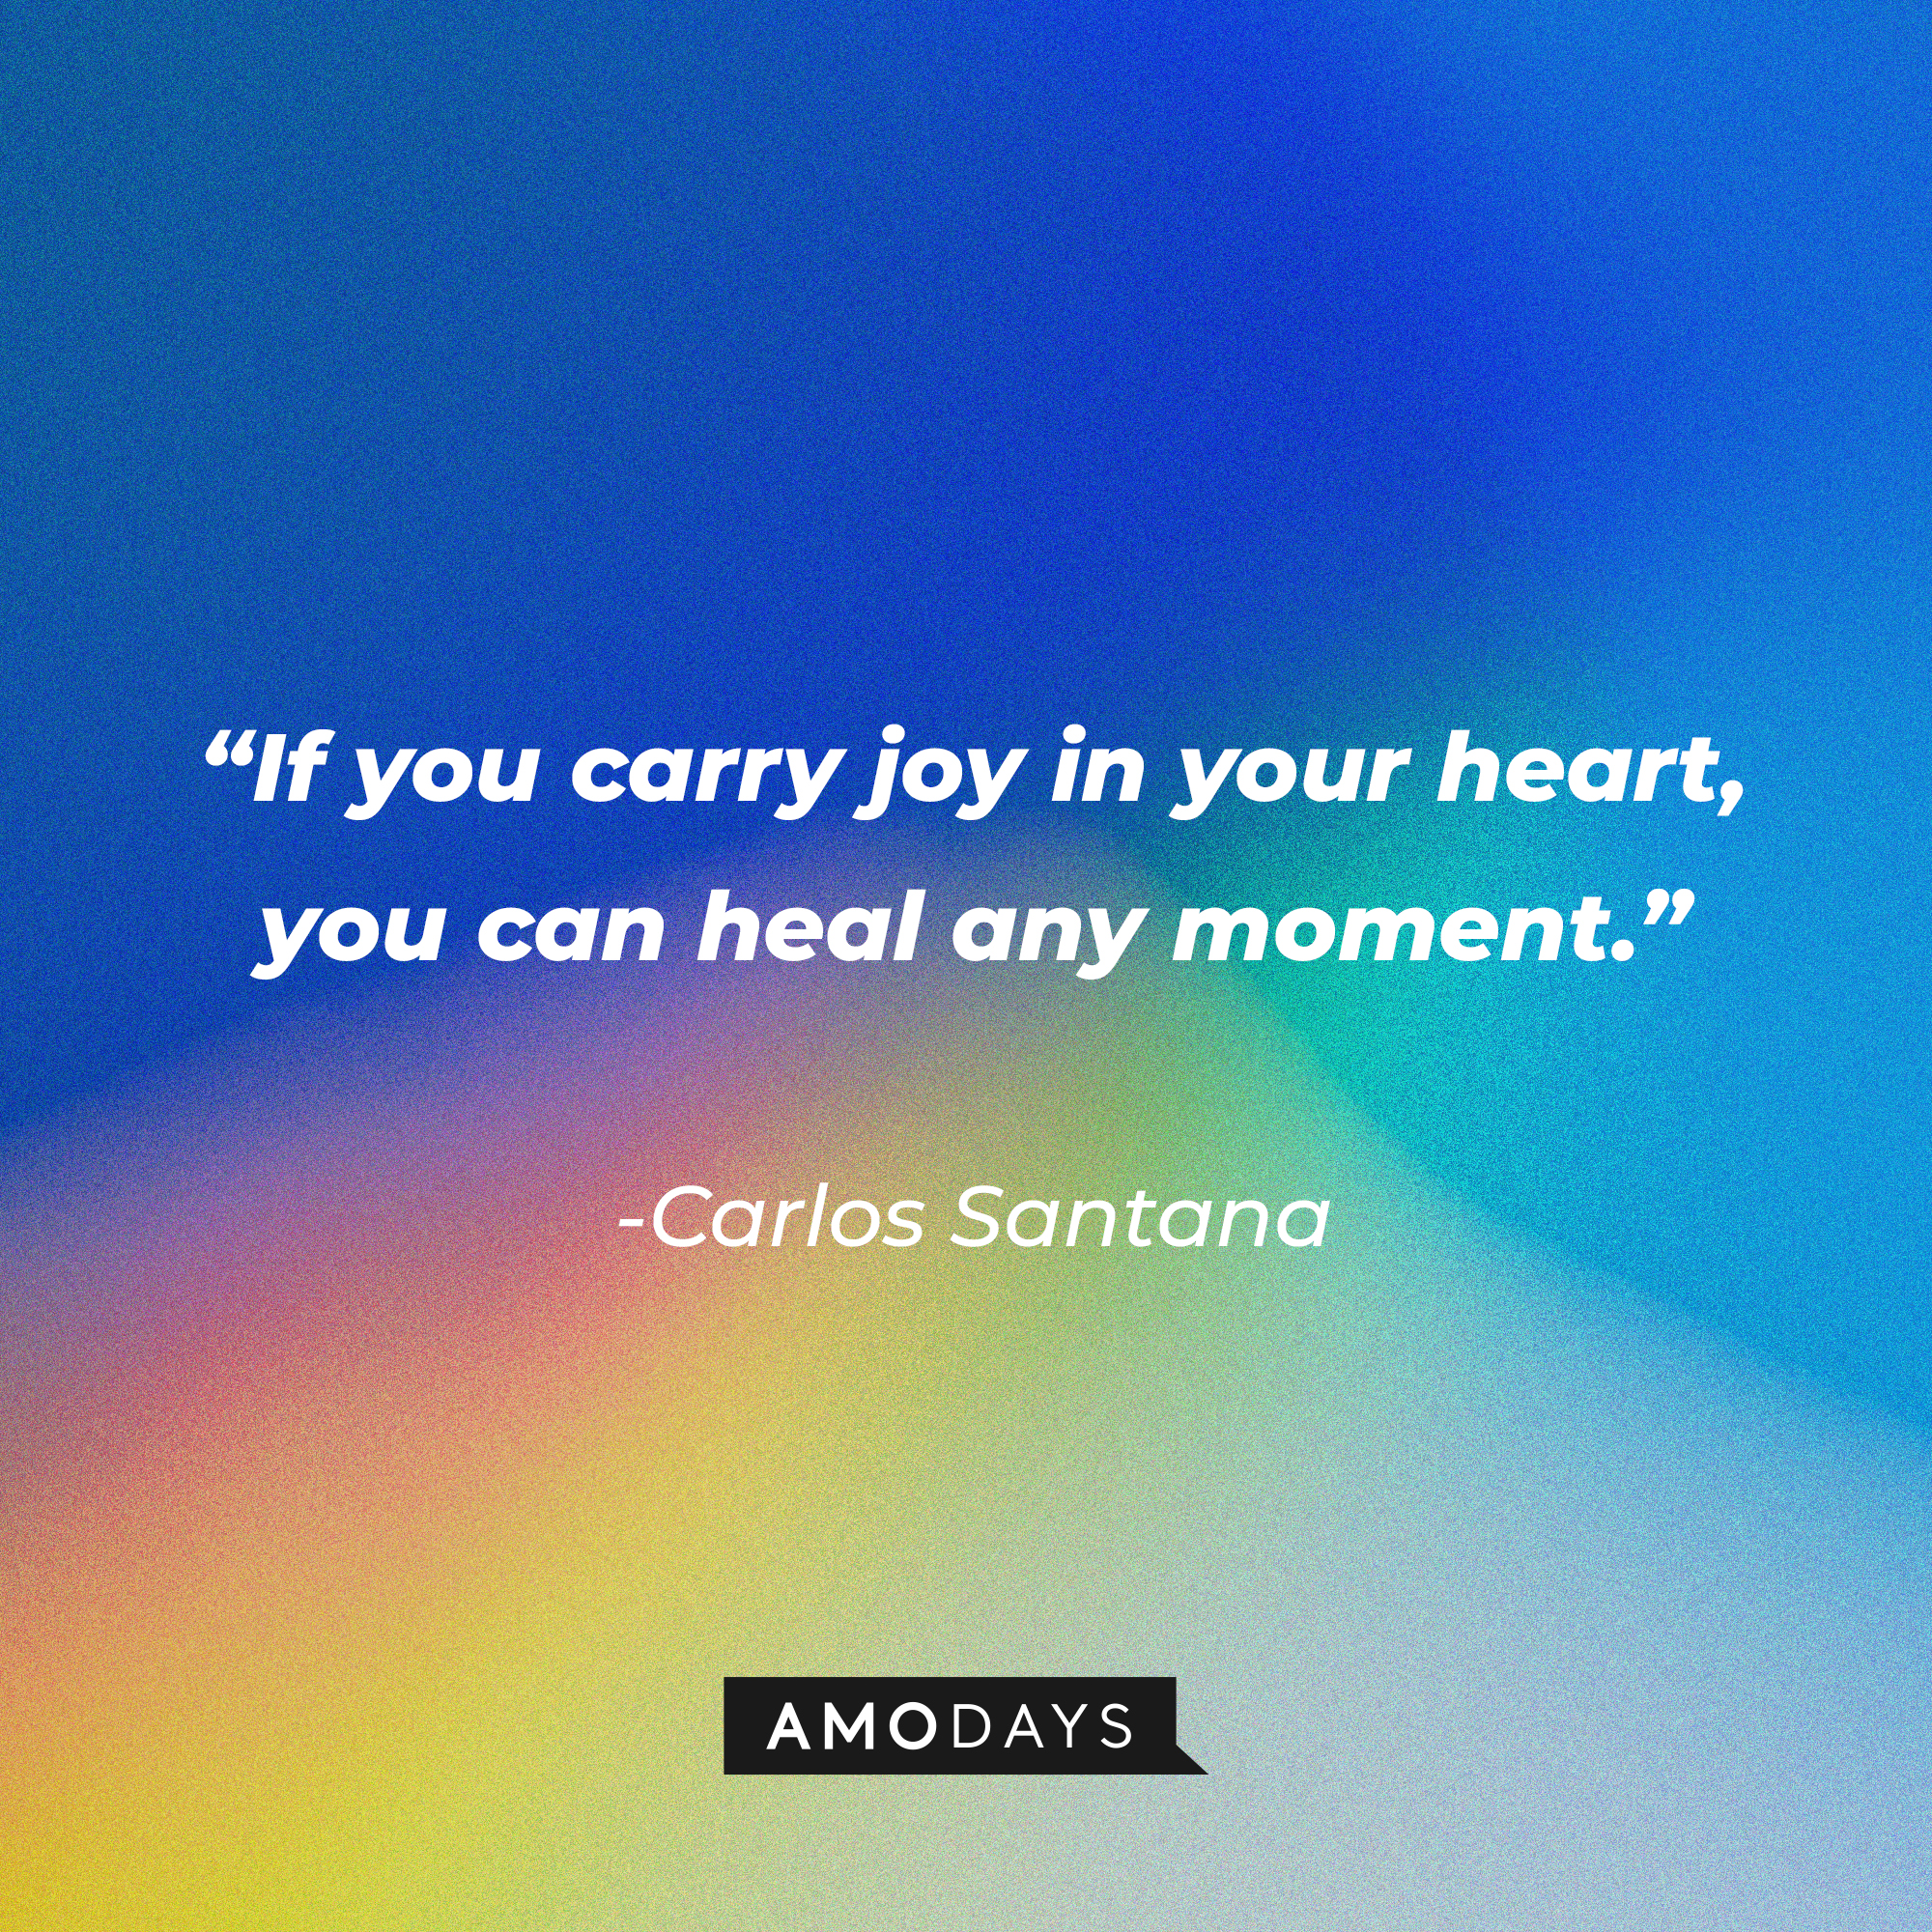 Carlos Santana’s quote: "If you carry joy in your heart, you can heal any moment."┃Source: AmoDays